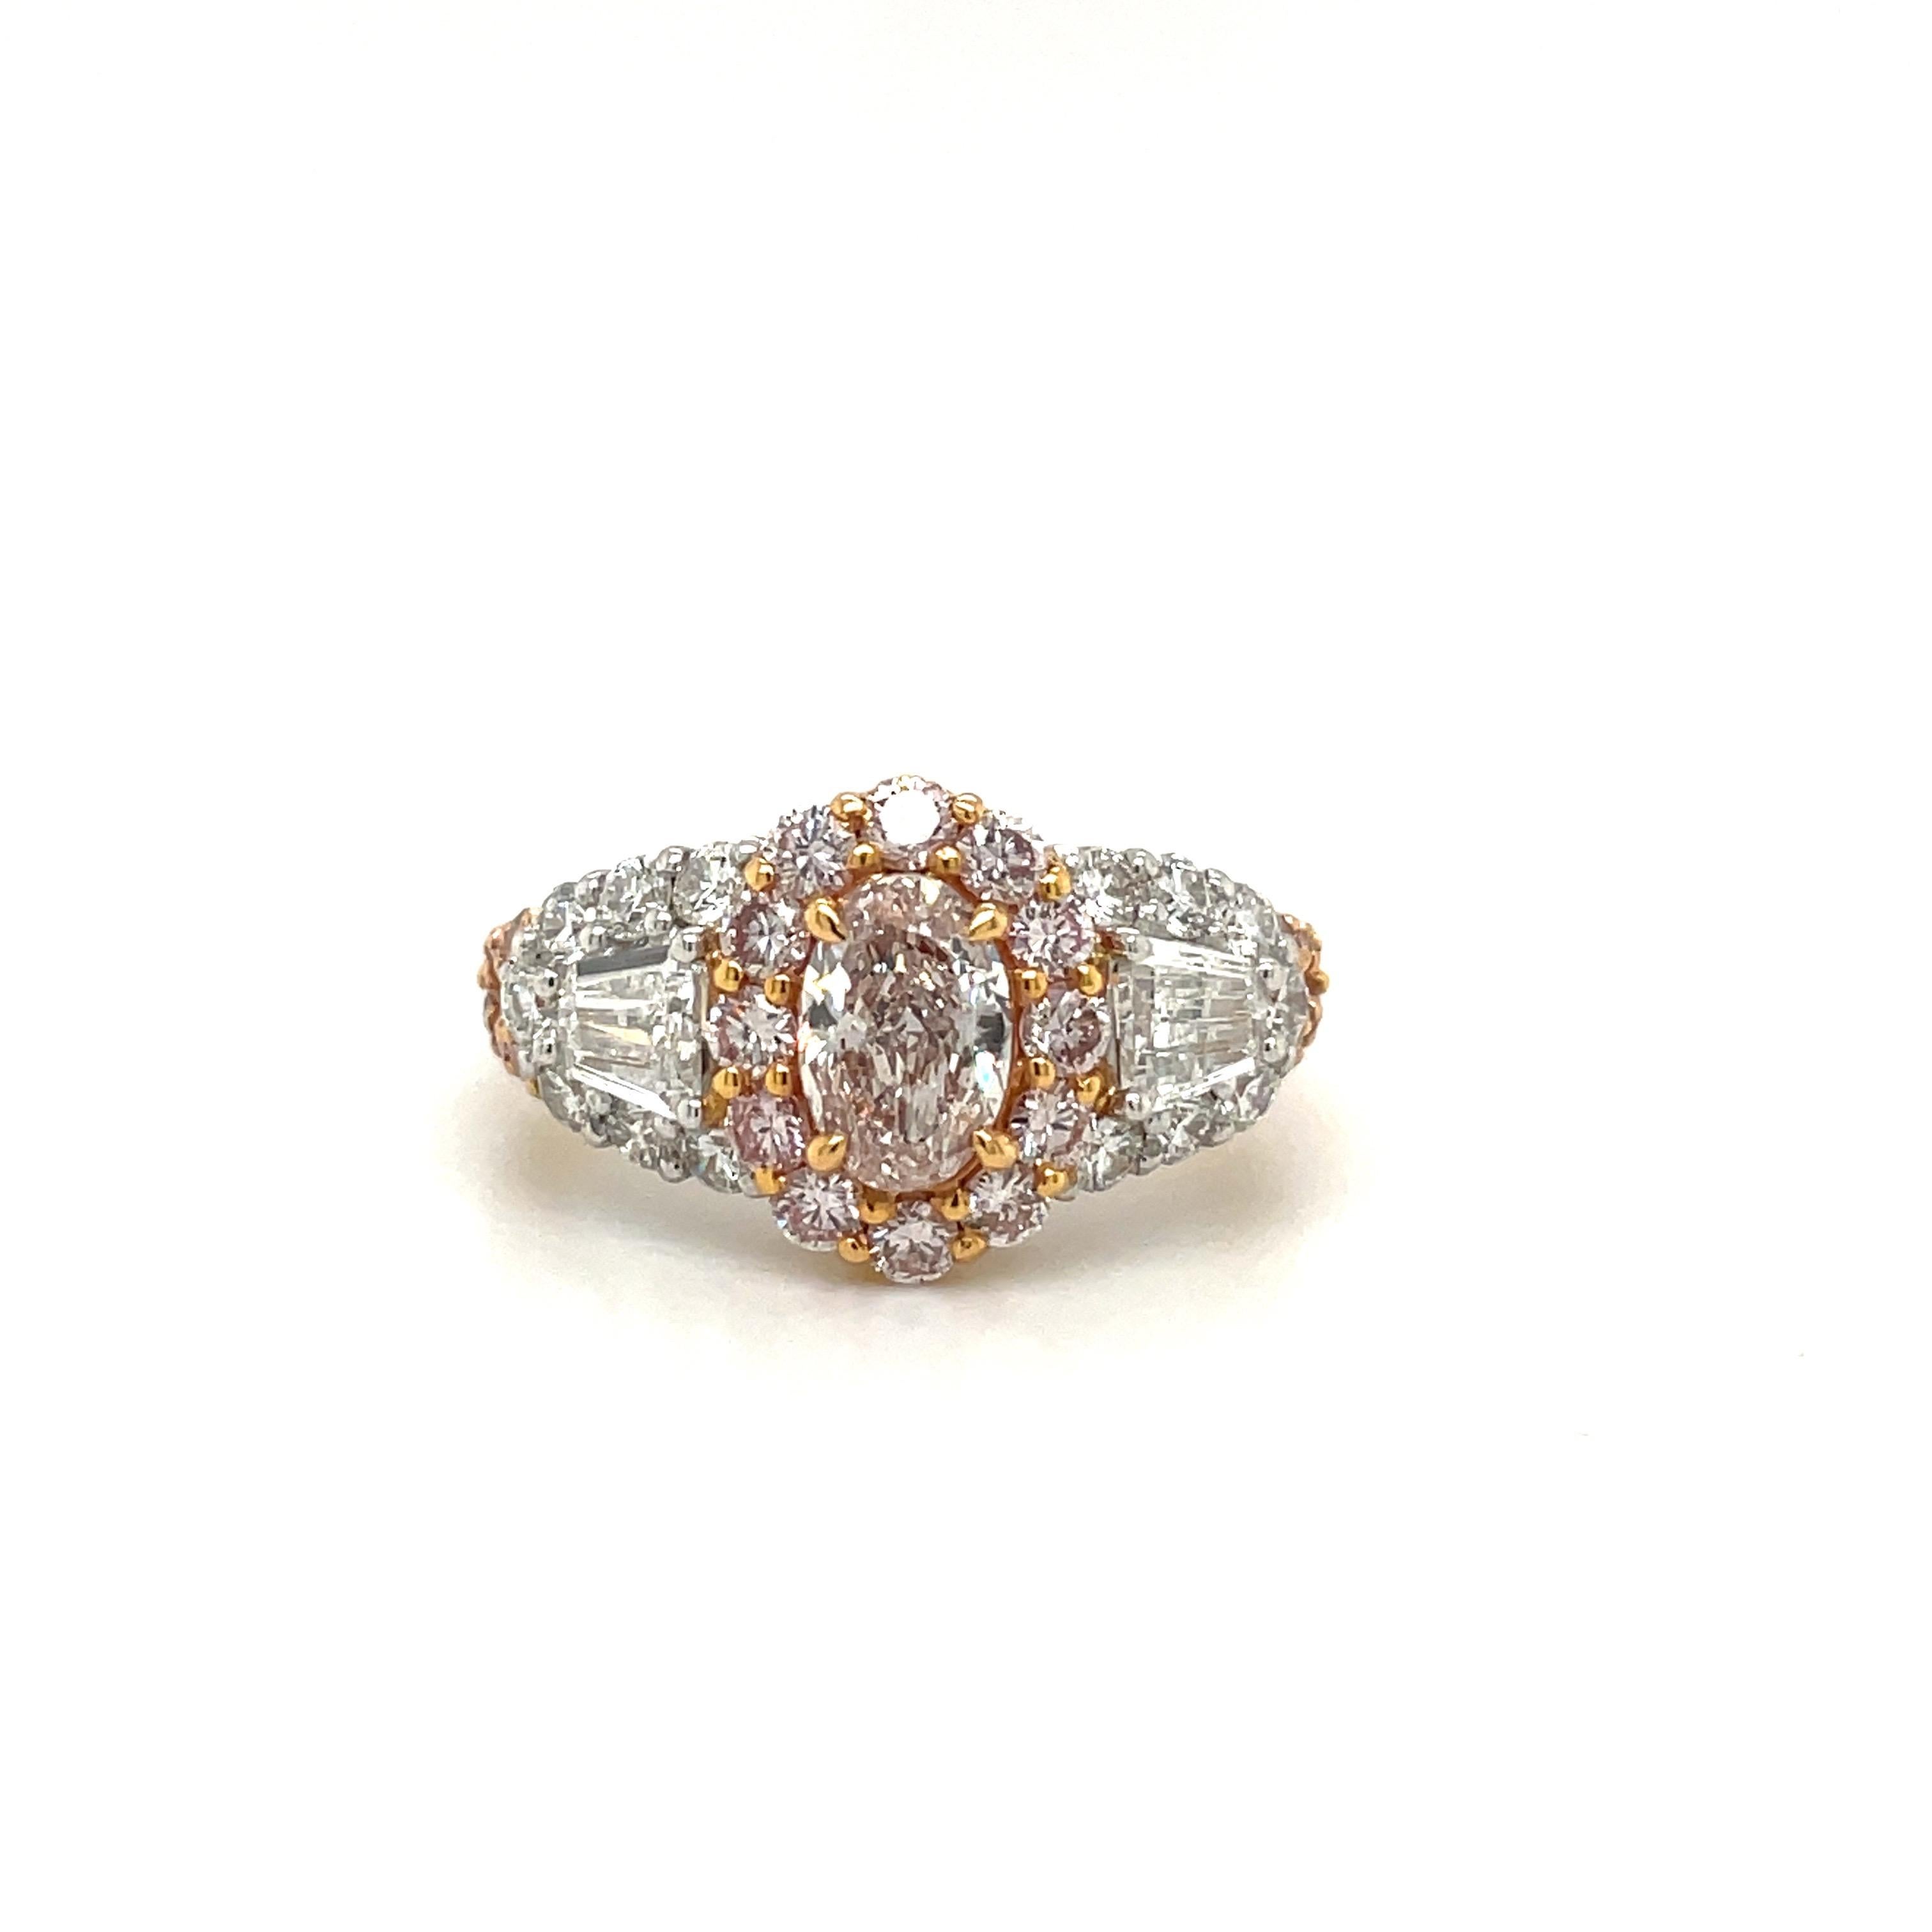 Oval Cut Fancy Light Pink Diamond Ring with White Diamonds Set in Rose Gold and Platinum For Sale